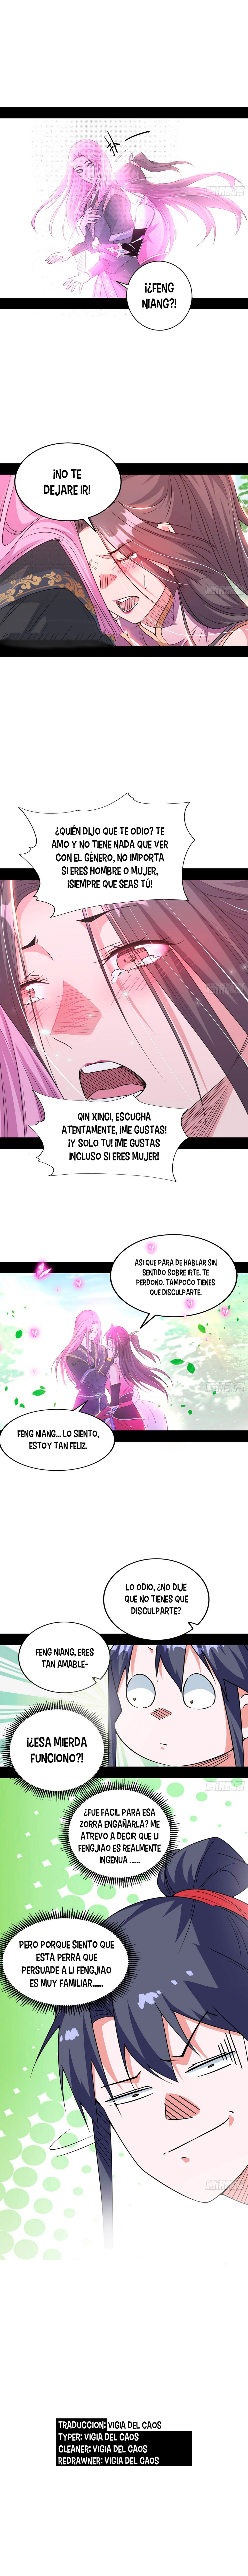 Manga Soy un dios maligno Chapter 267 image number 5